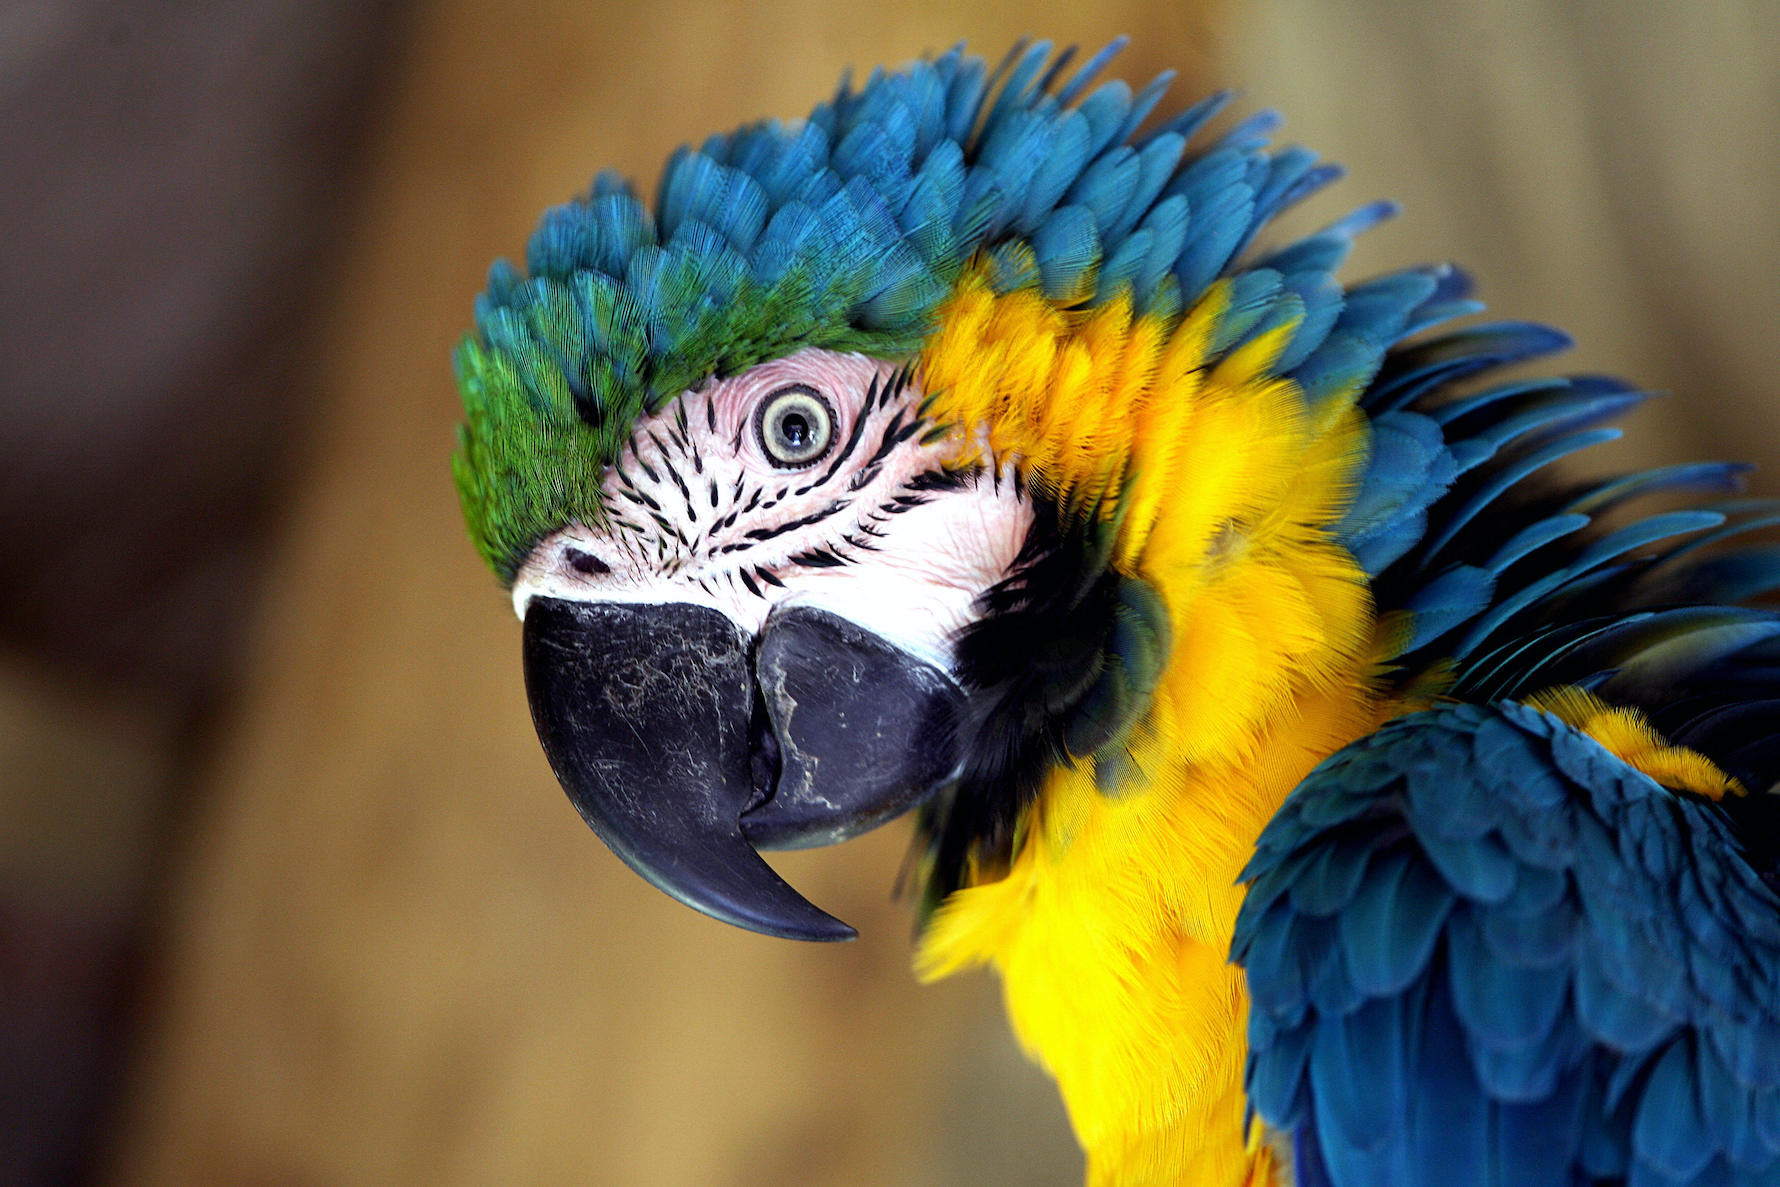 More Parrots Brought to Shelters Due to Pandemic